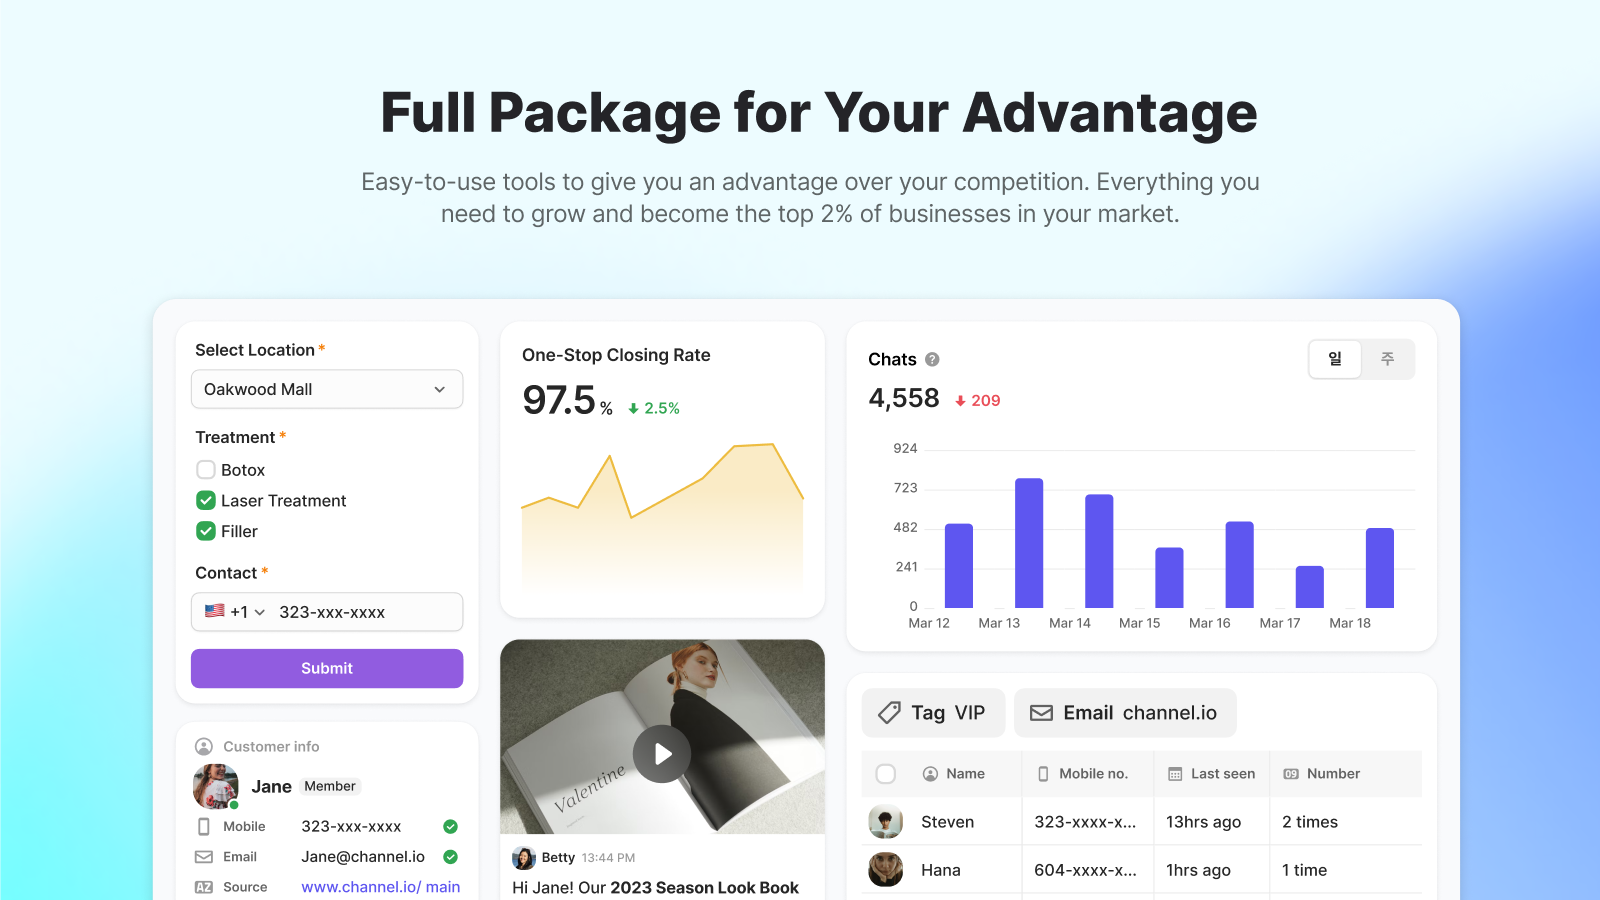 Full Package for Your Advantage - Easy-to-use tools to give you an advantage over your competition. Everything you need to grow and become the top 2% of businesses in your market.